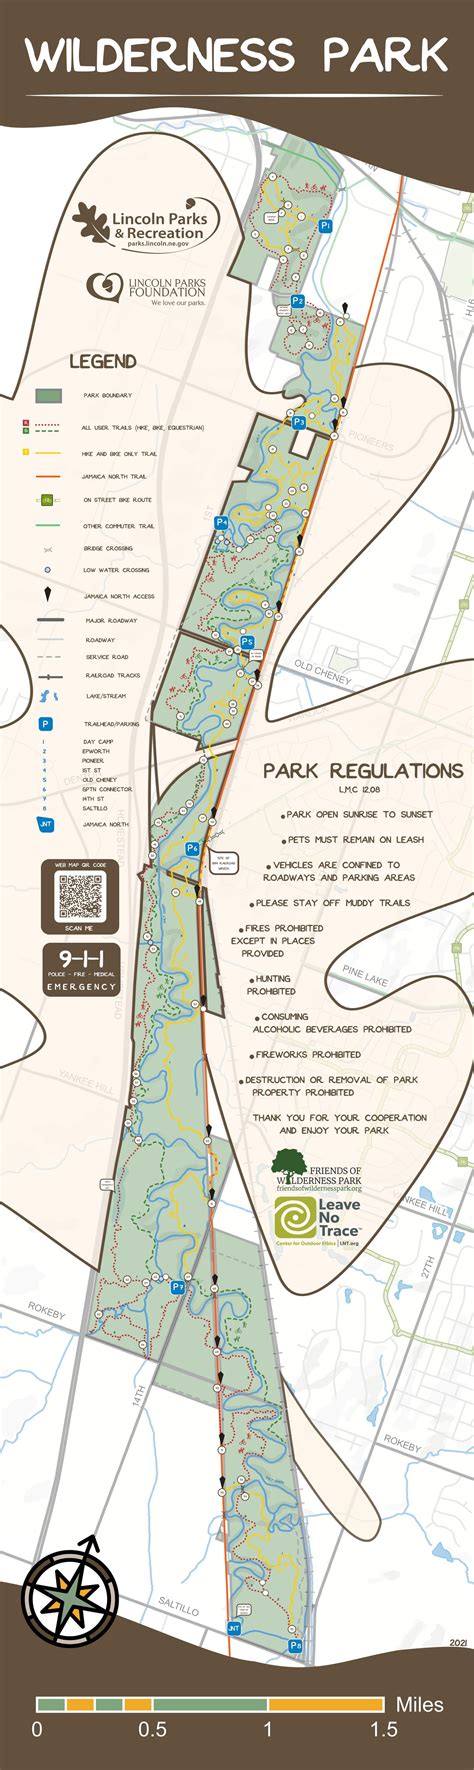 Friends Of Wilderness Park Explore Trail Map And Access